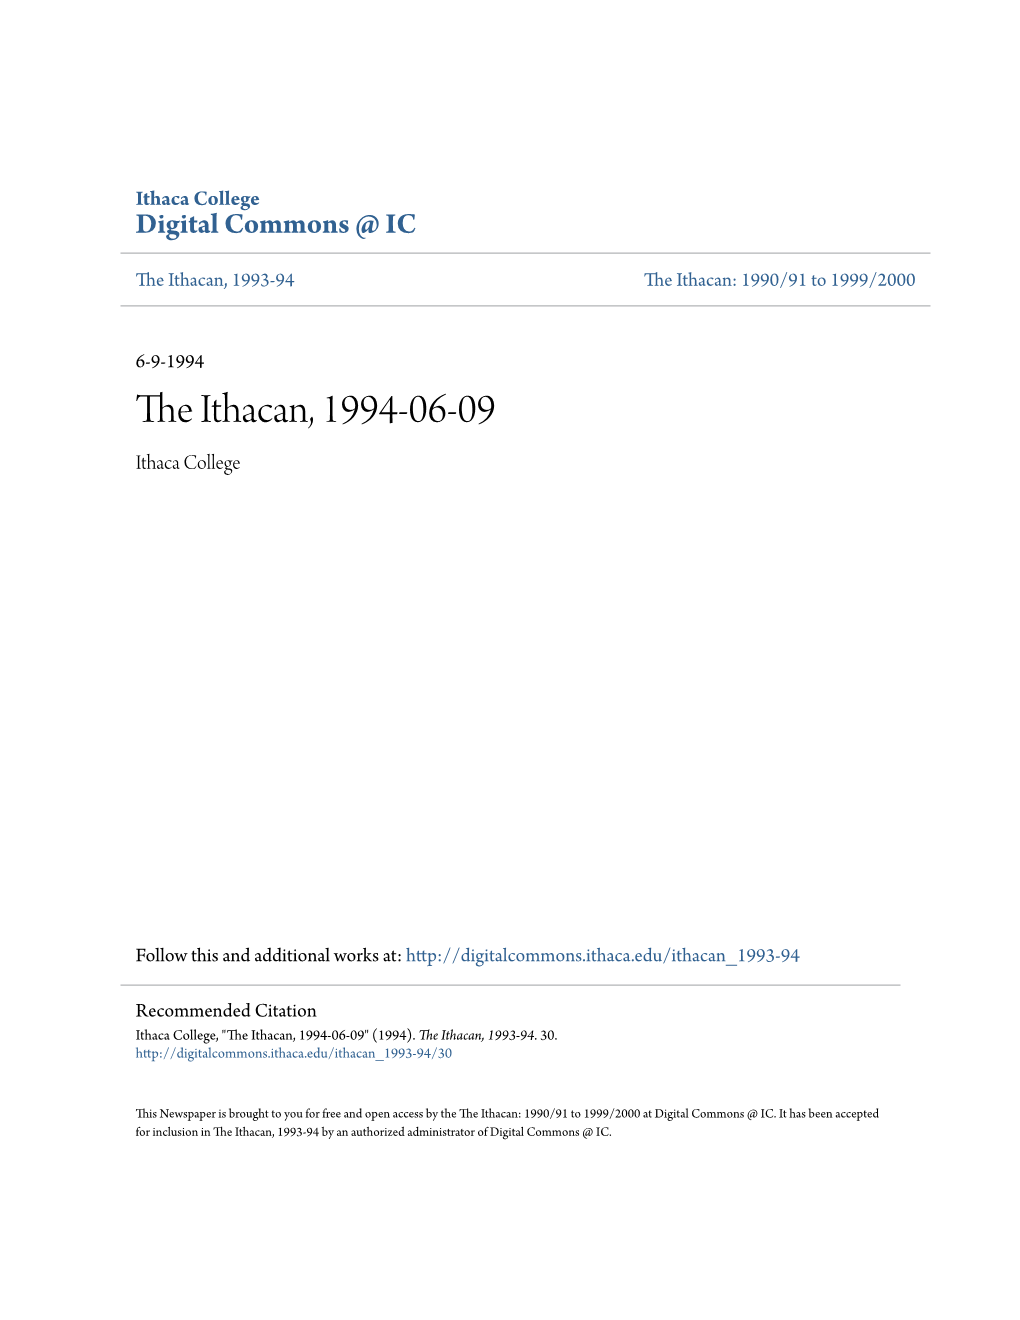 The Ithacan, 1994-06-09